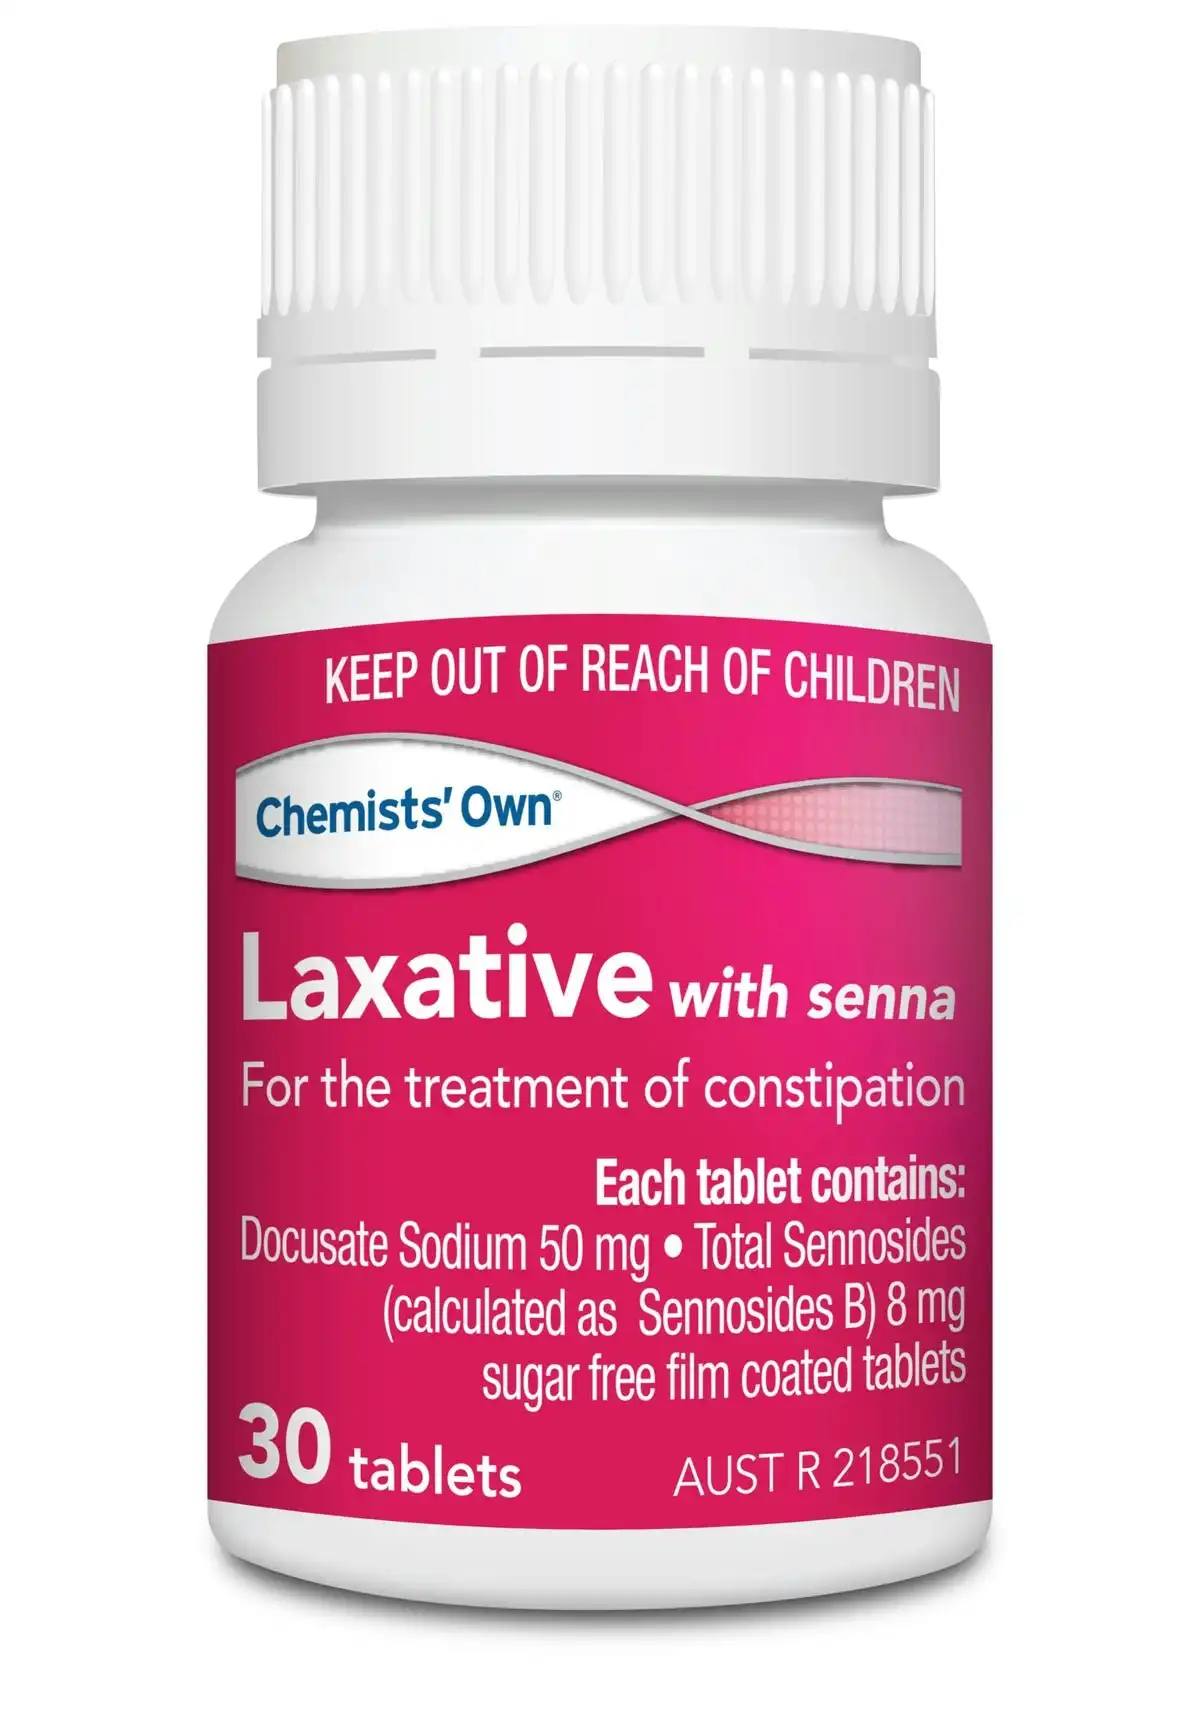 Chemists' Own Laxative with Senna 30 Tablets (Generic of COLOXY WITH SENNA)